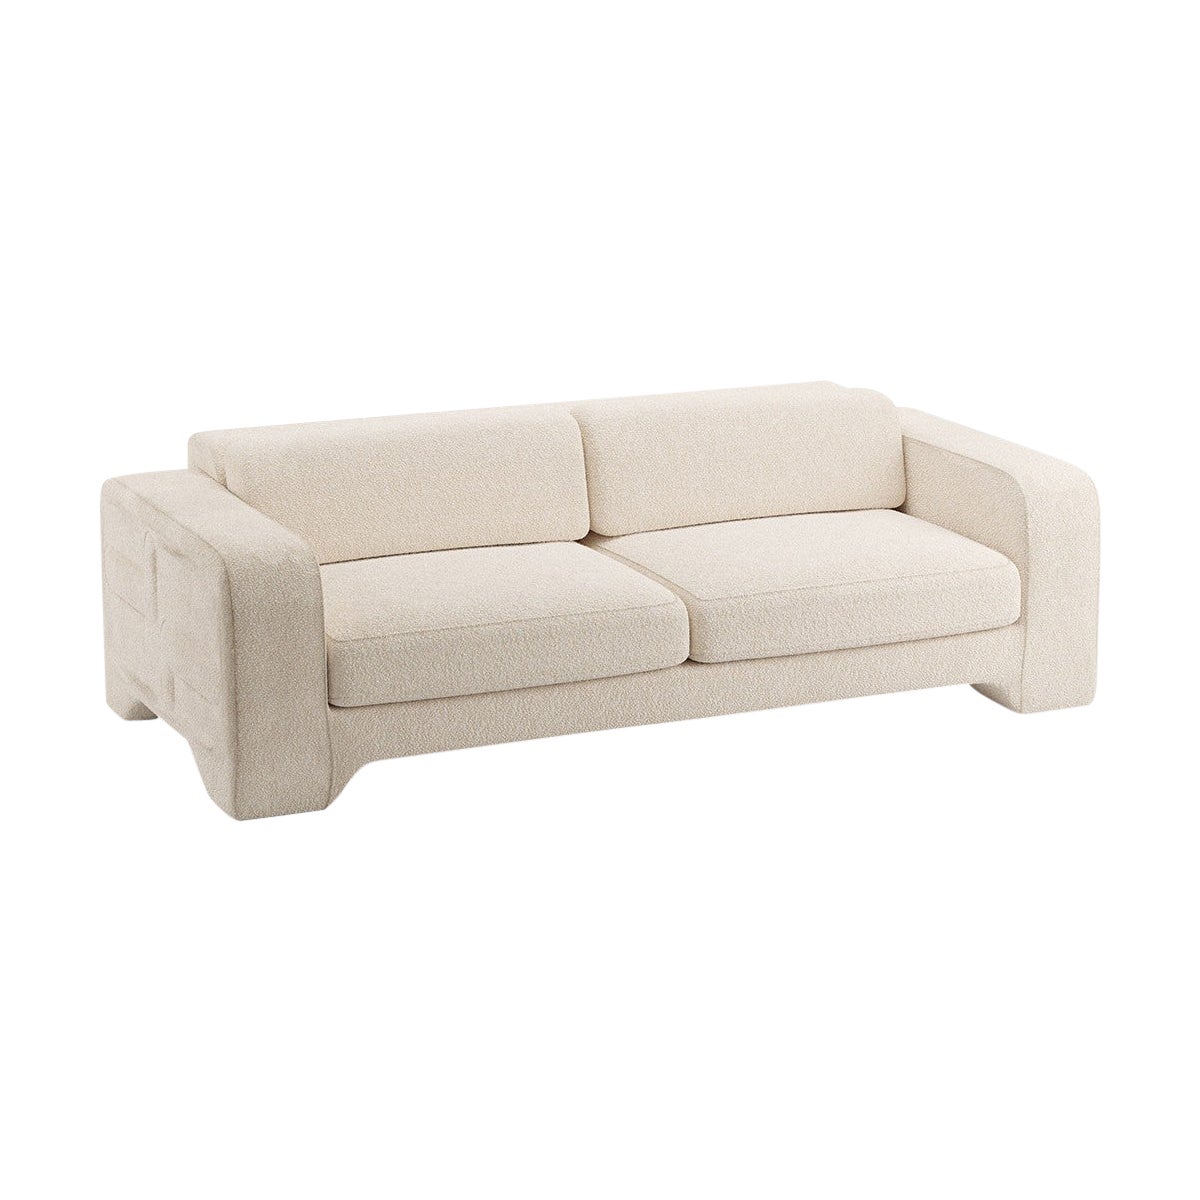 Popus Editions Giovanna 2.5 Seater Sofa in Natural Athena Loop Yarn Upholstery